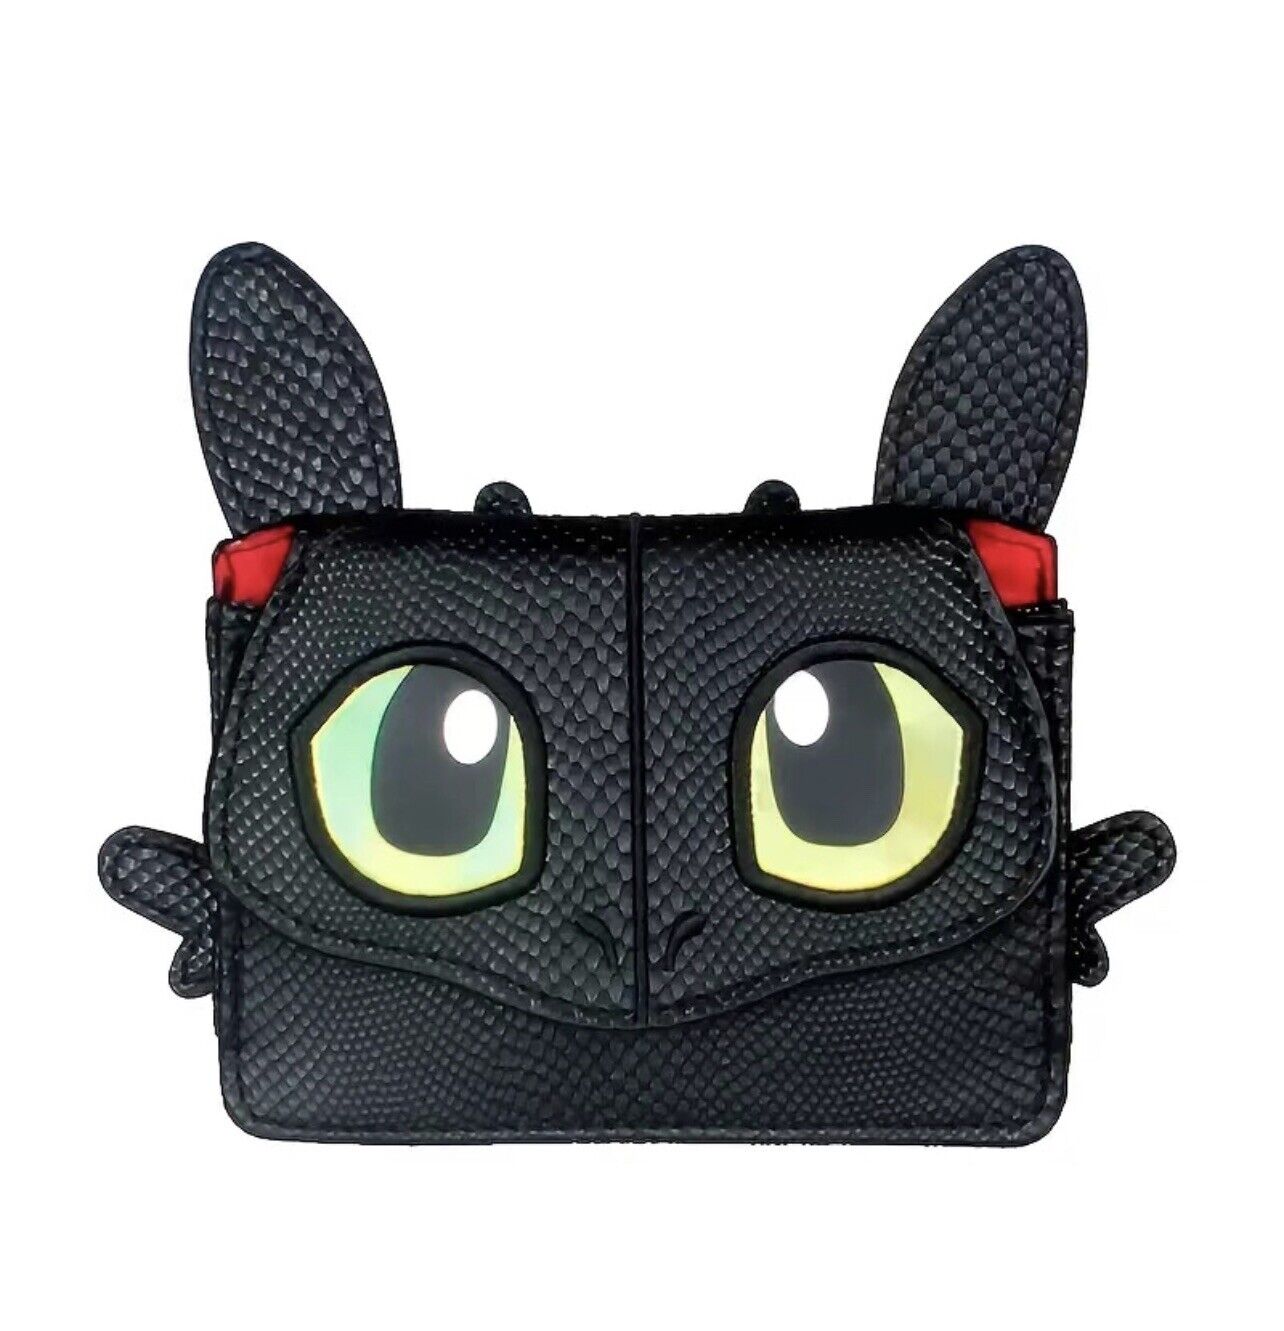 Toothless Handbag: Fierce Fashion Accessory for How To Train Your Dragon Fans